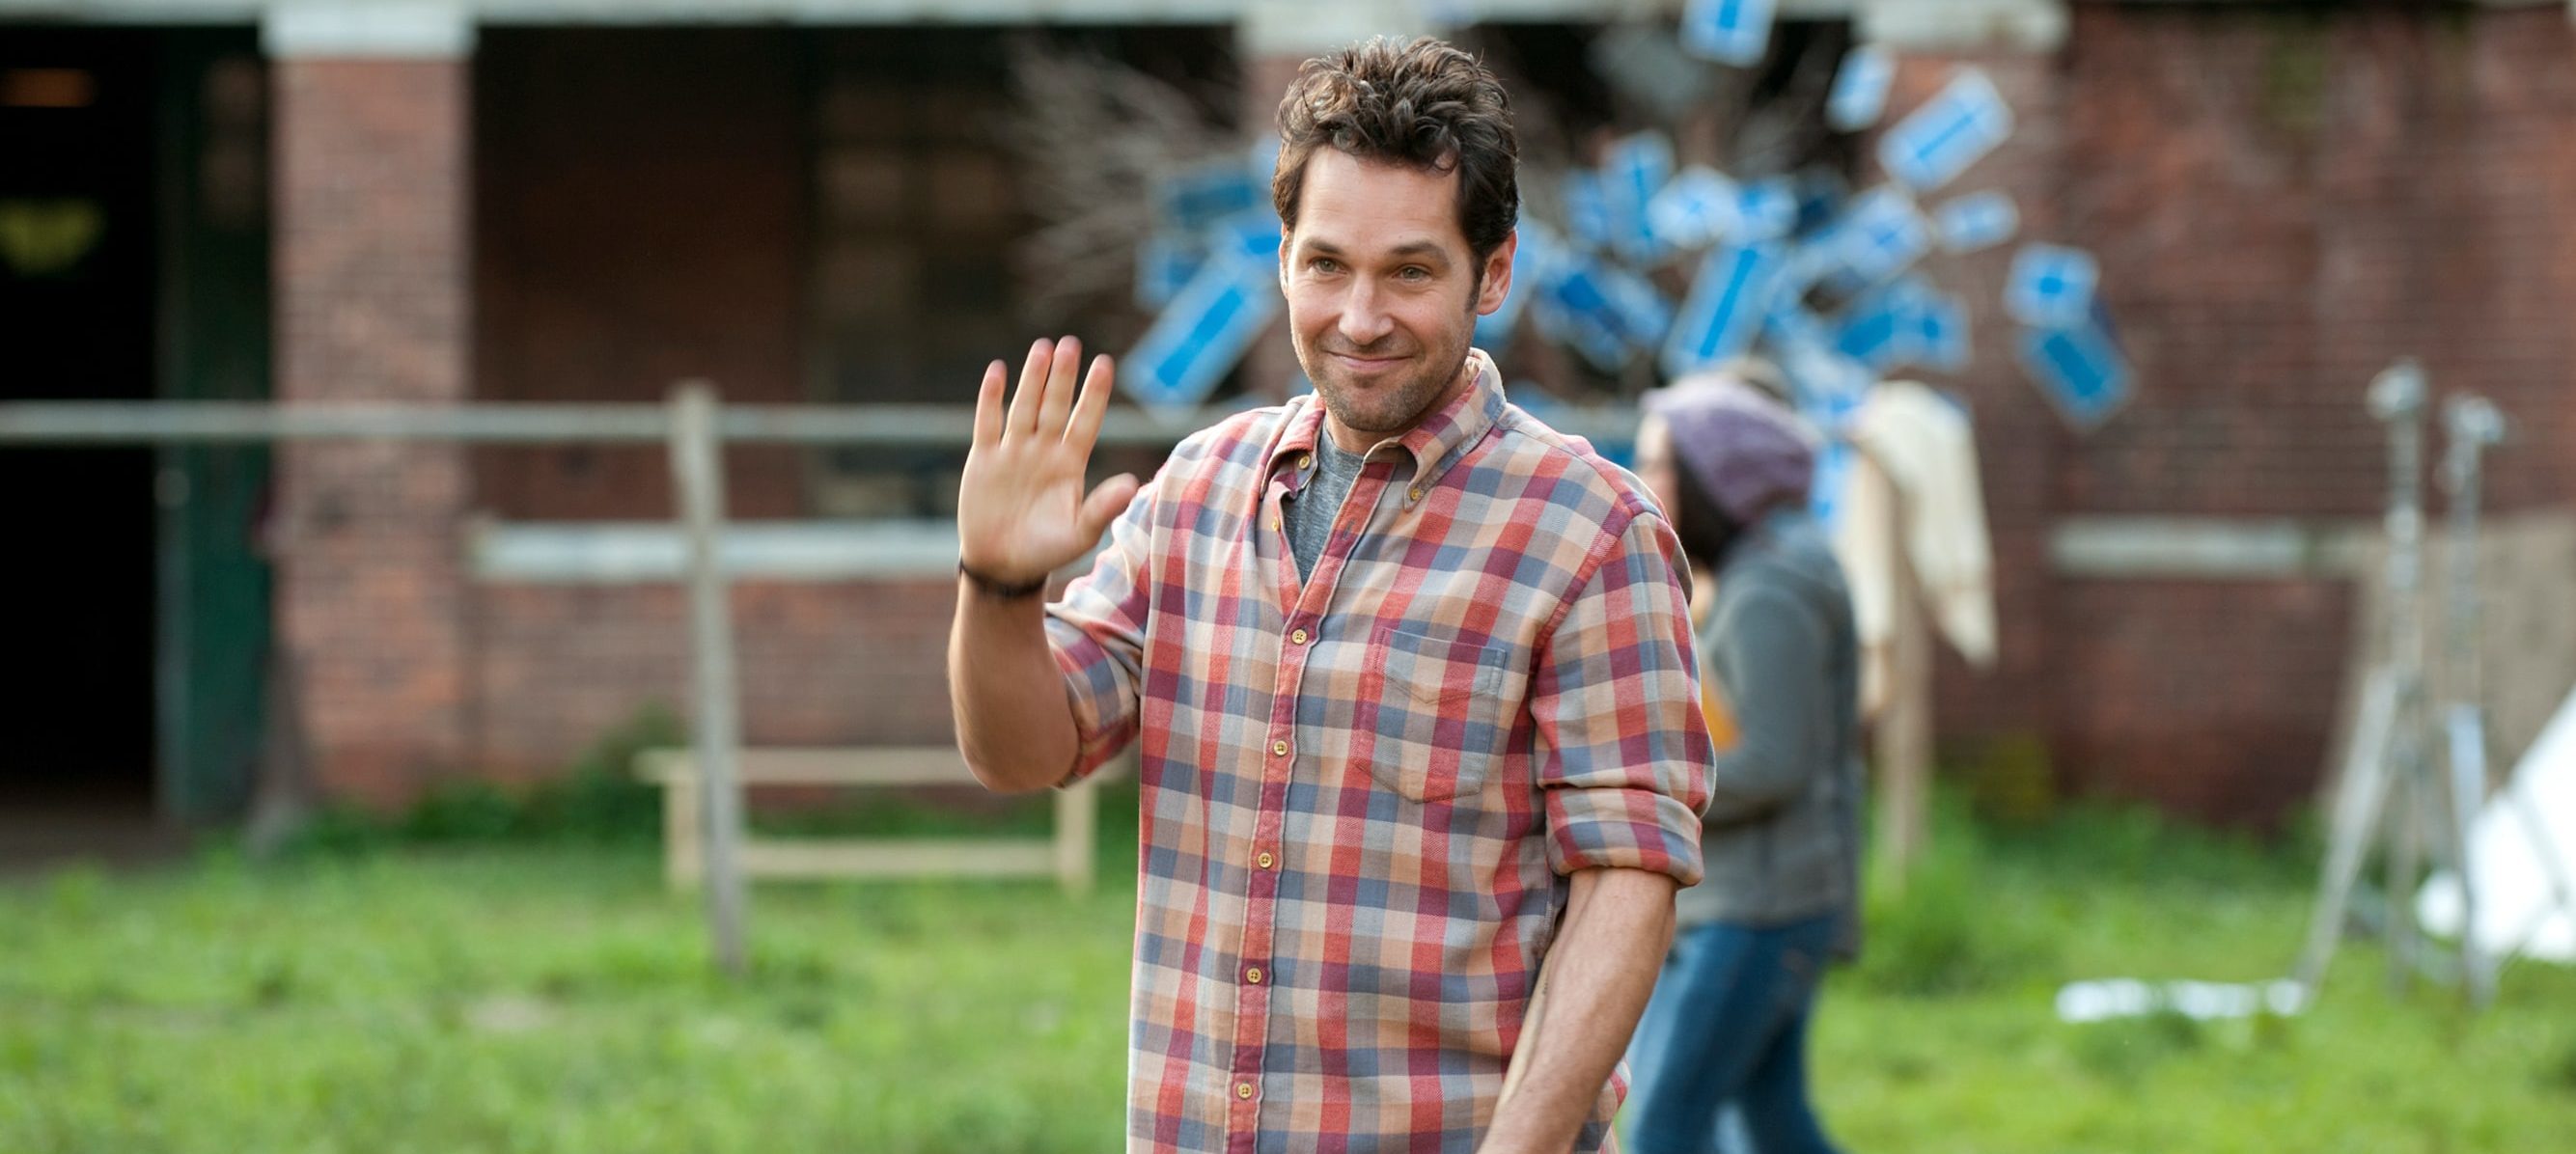 All Upcoming Paul Rudd Movies and TV Shows